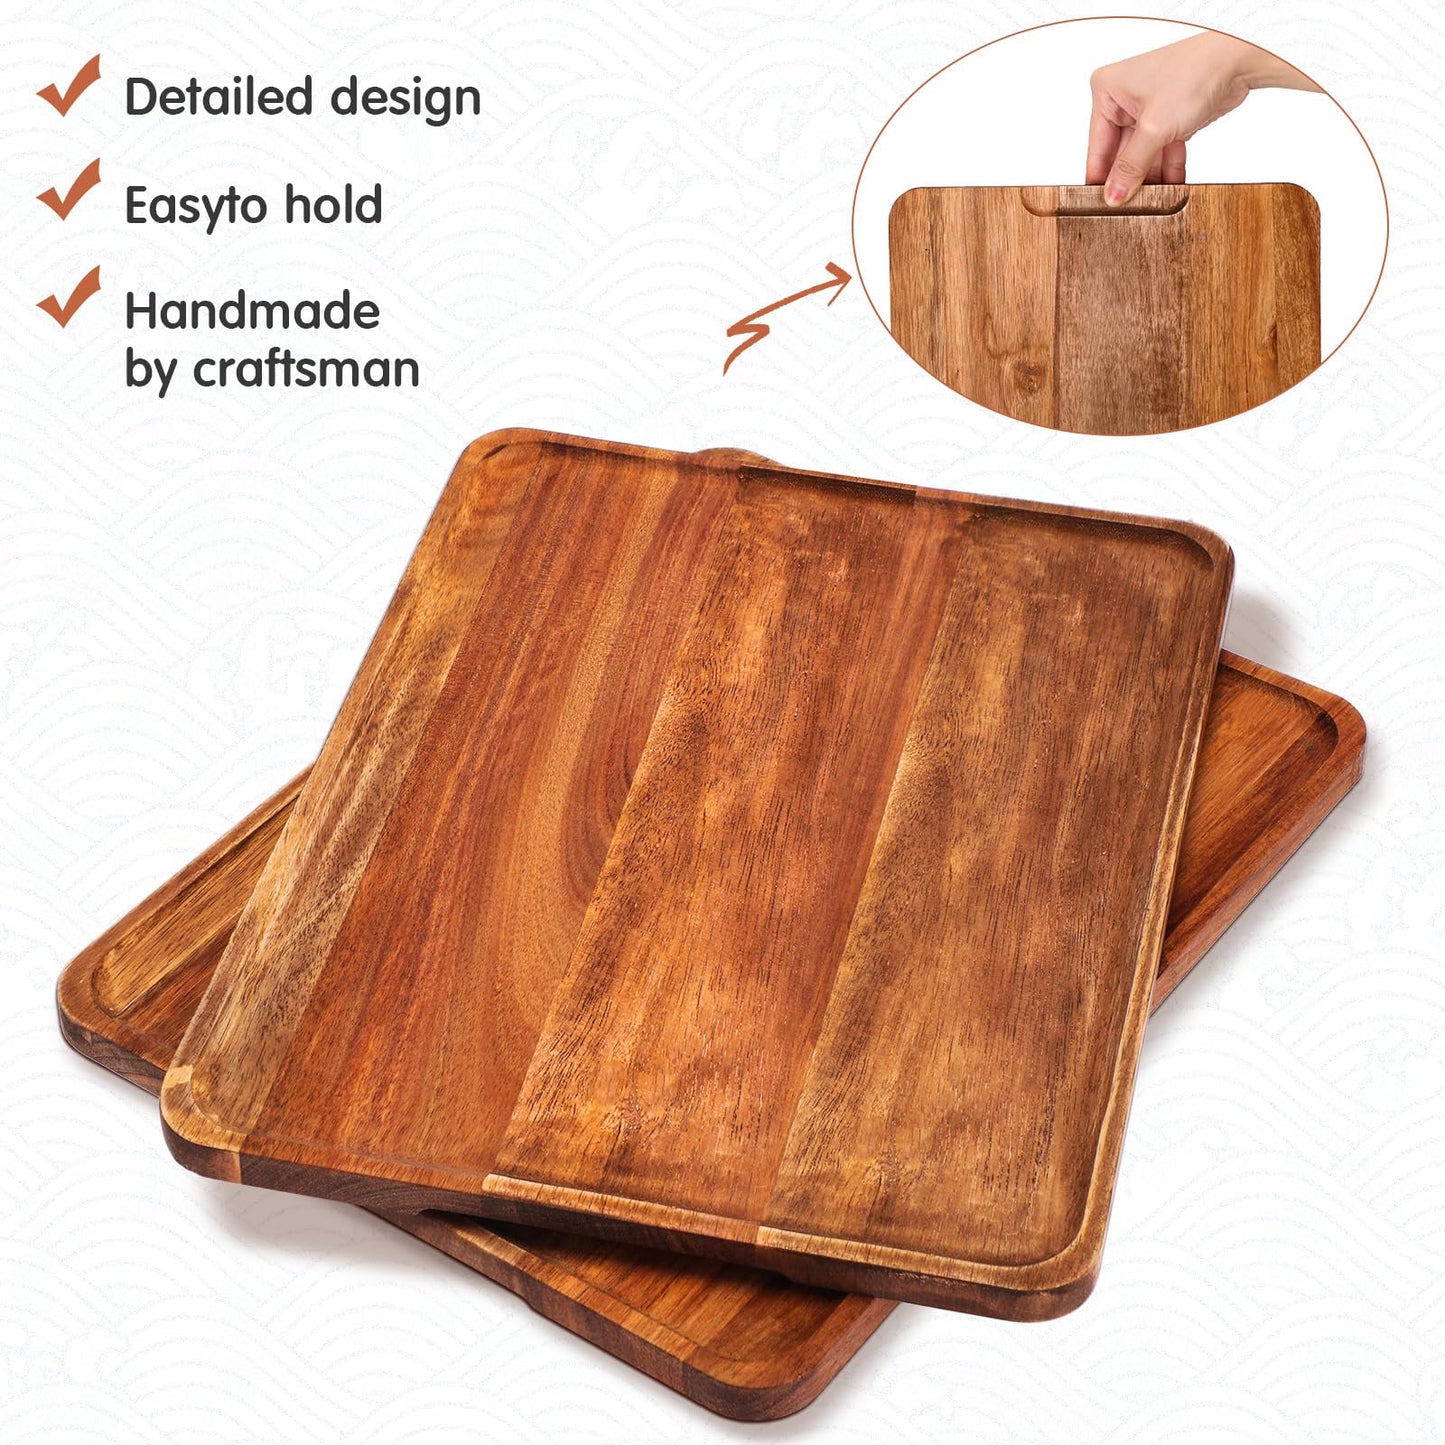 5 Pack Solid Acacia Wood Serving Trays, Rectangular Wooden Serving Board for Food Appetizer Serving Tray Plates for Vegetables Fruit Charcuterie